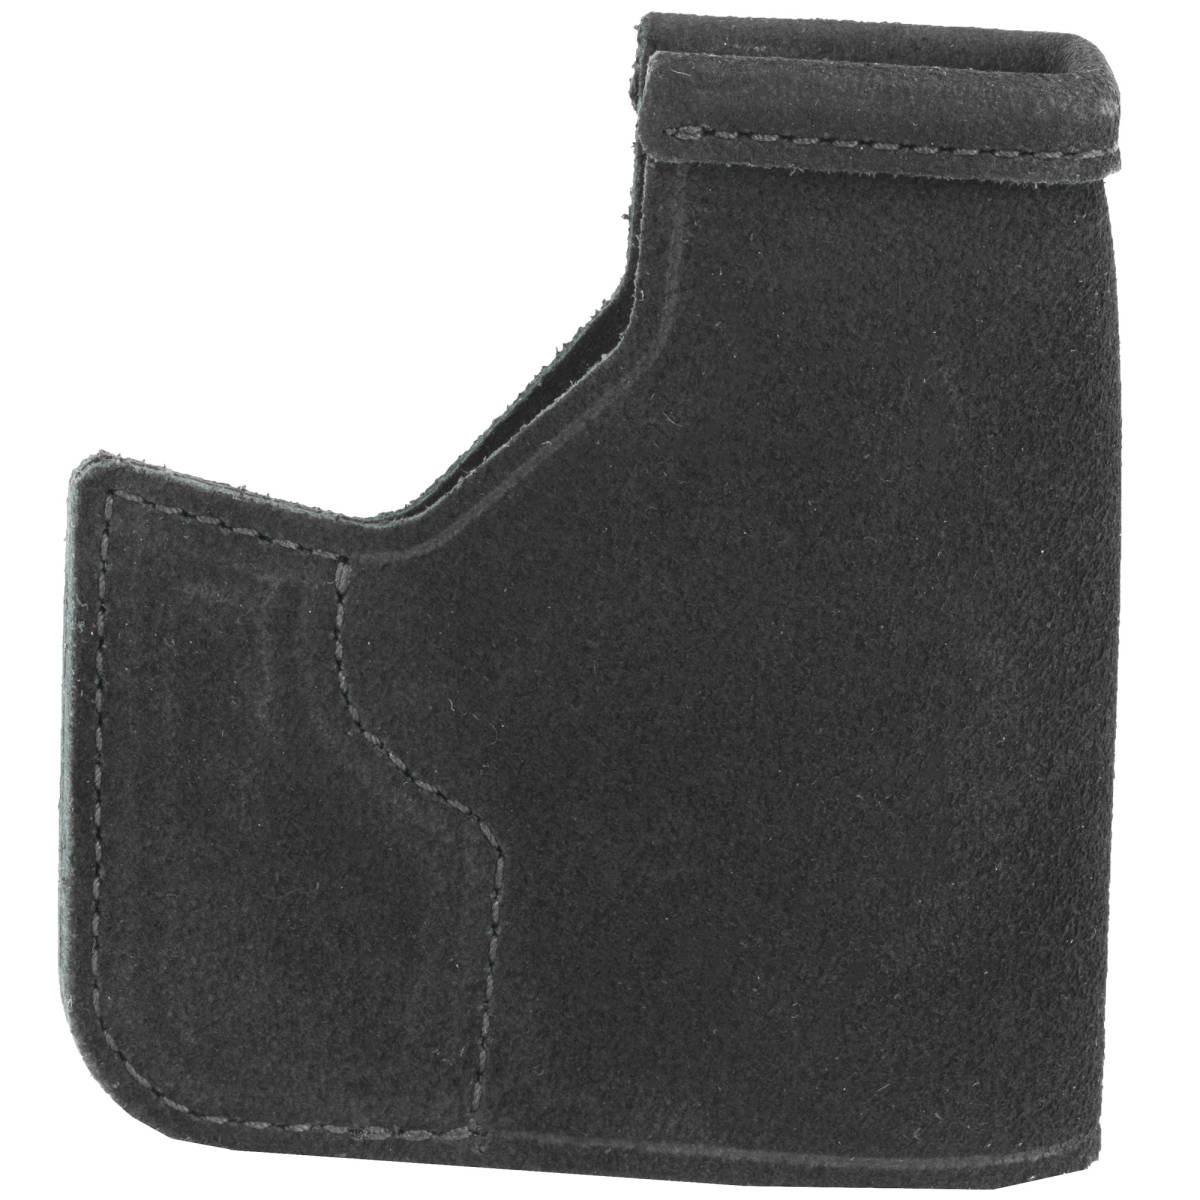 Galco PRO626B Pocket Protector Black Leather Fits S&W Bodyguard/Charter...-img-0